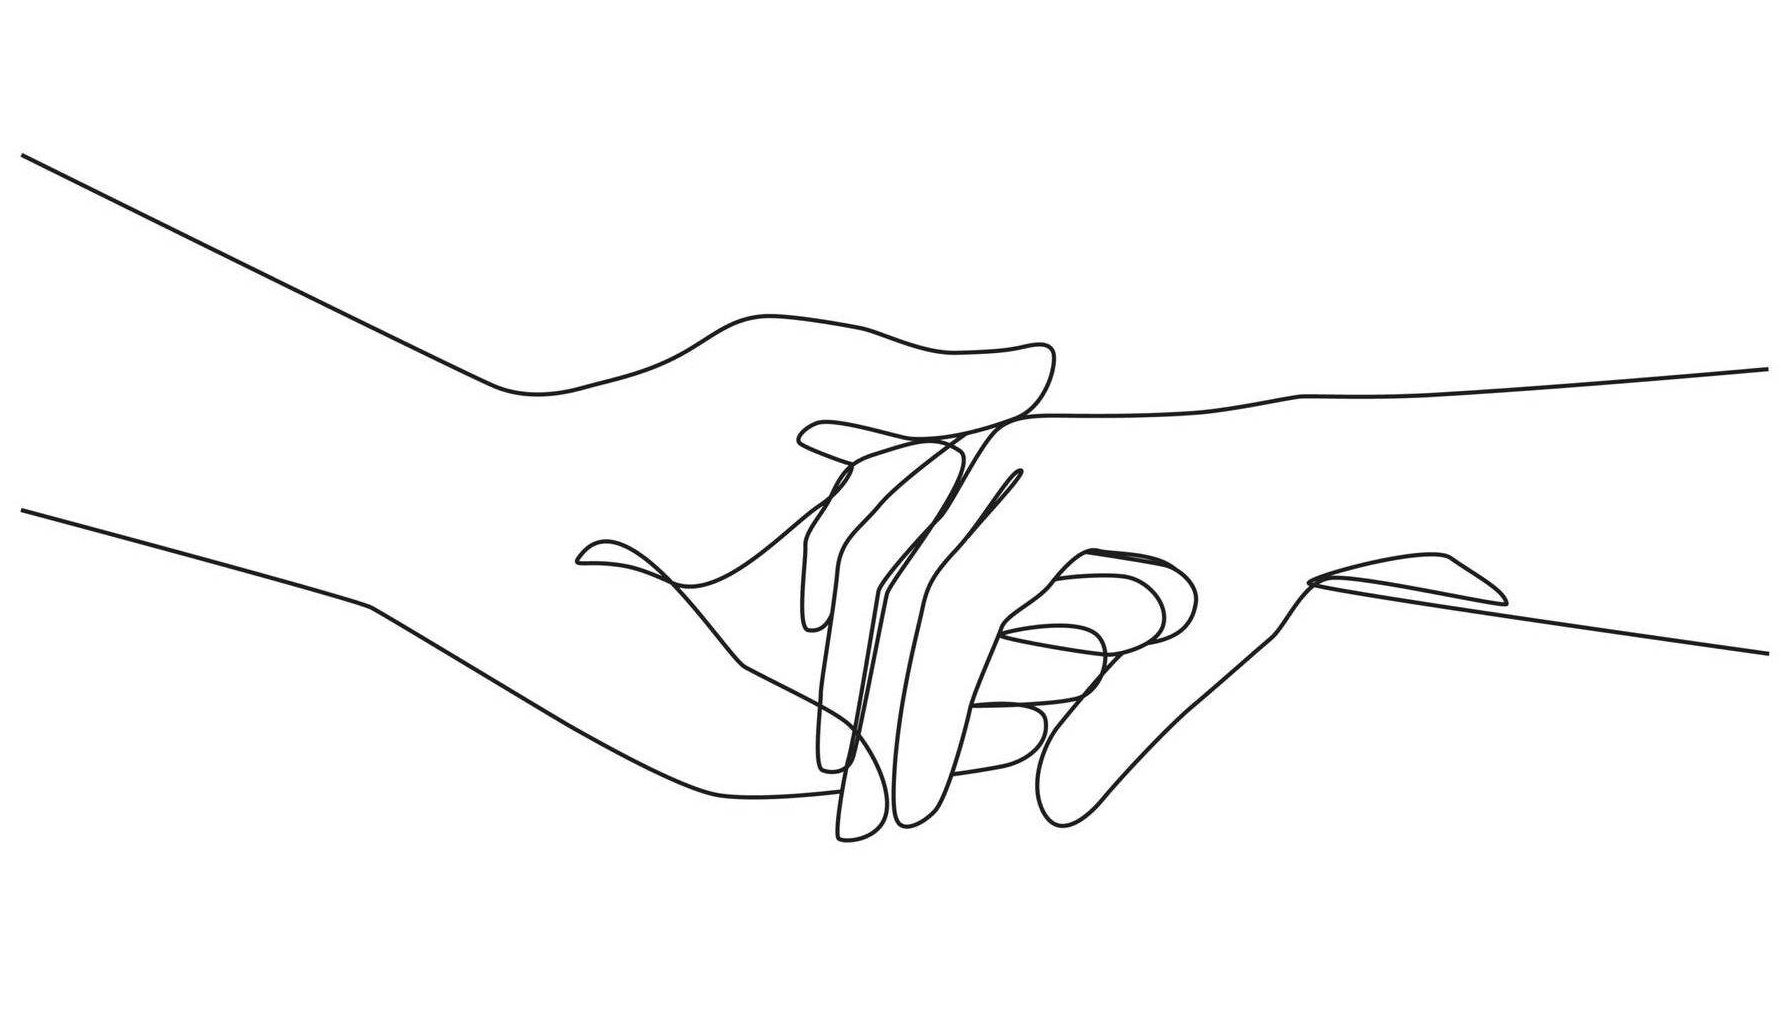 Line illustration of hands holding. Rewire PBS Health Suicide Ideation